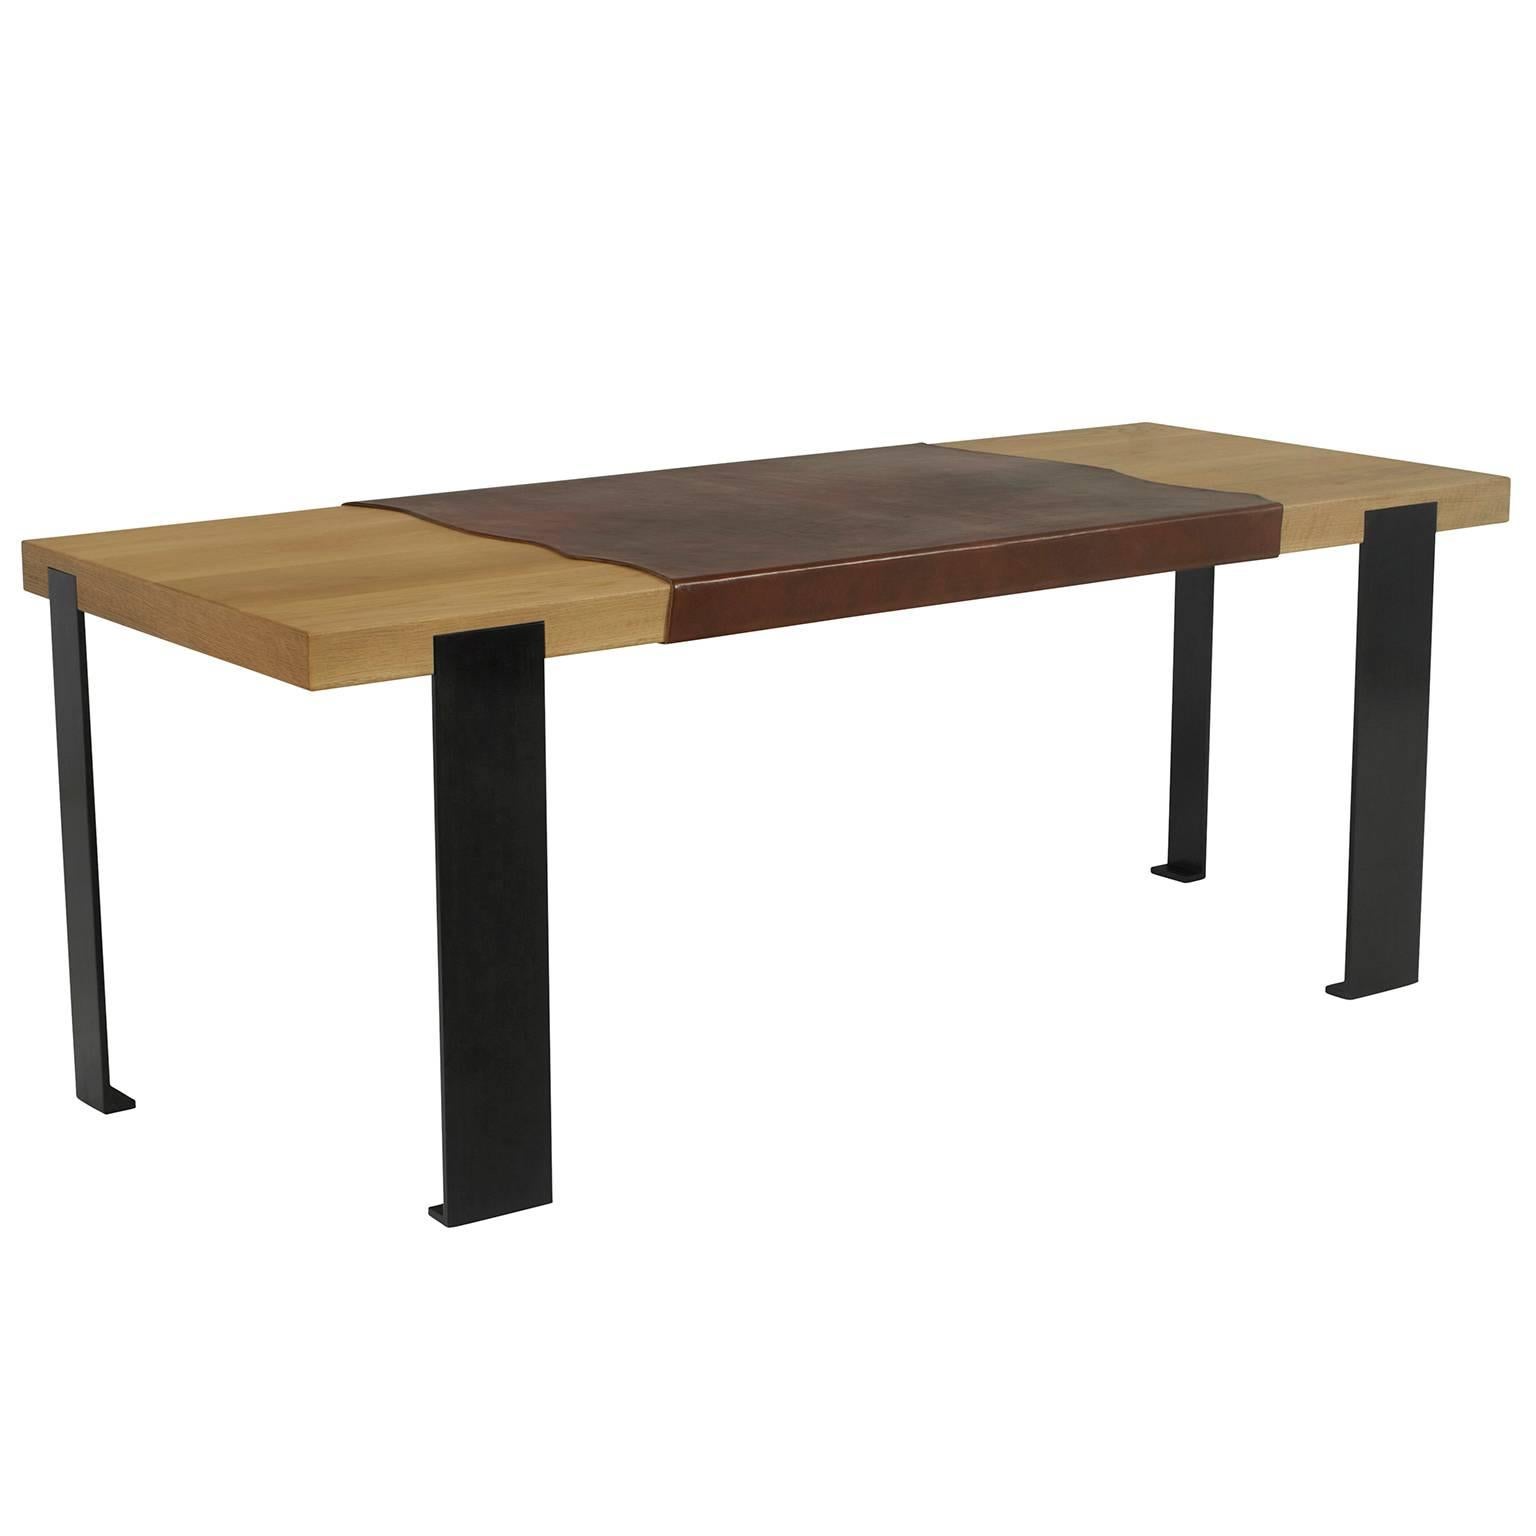 Cut Steel Contemporary Desk in Solid Oak and Blackened Steel Legs by Carbonell Design For Sale